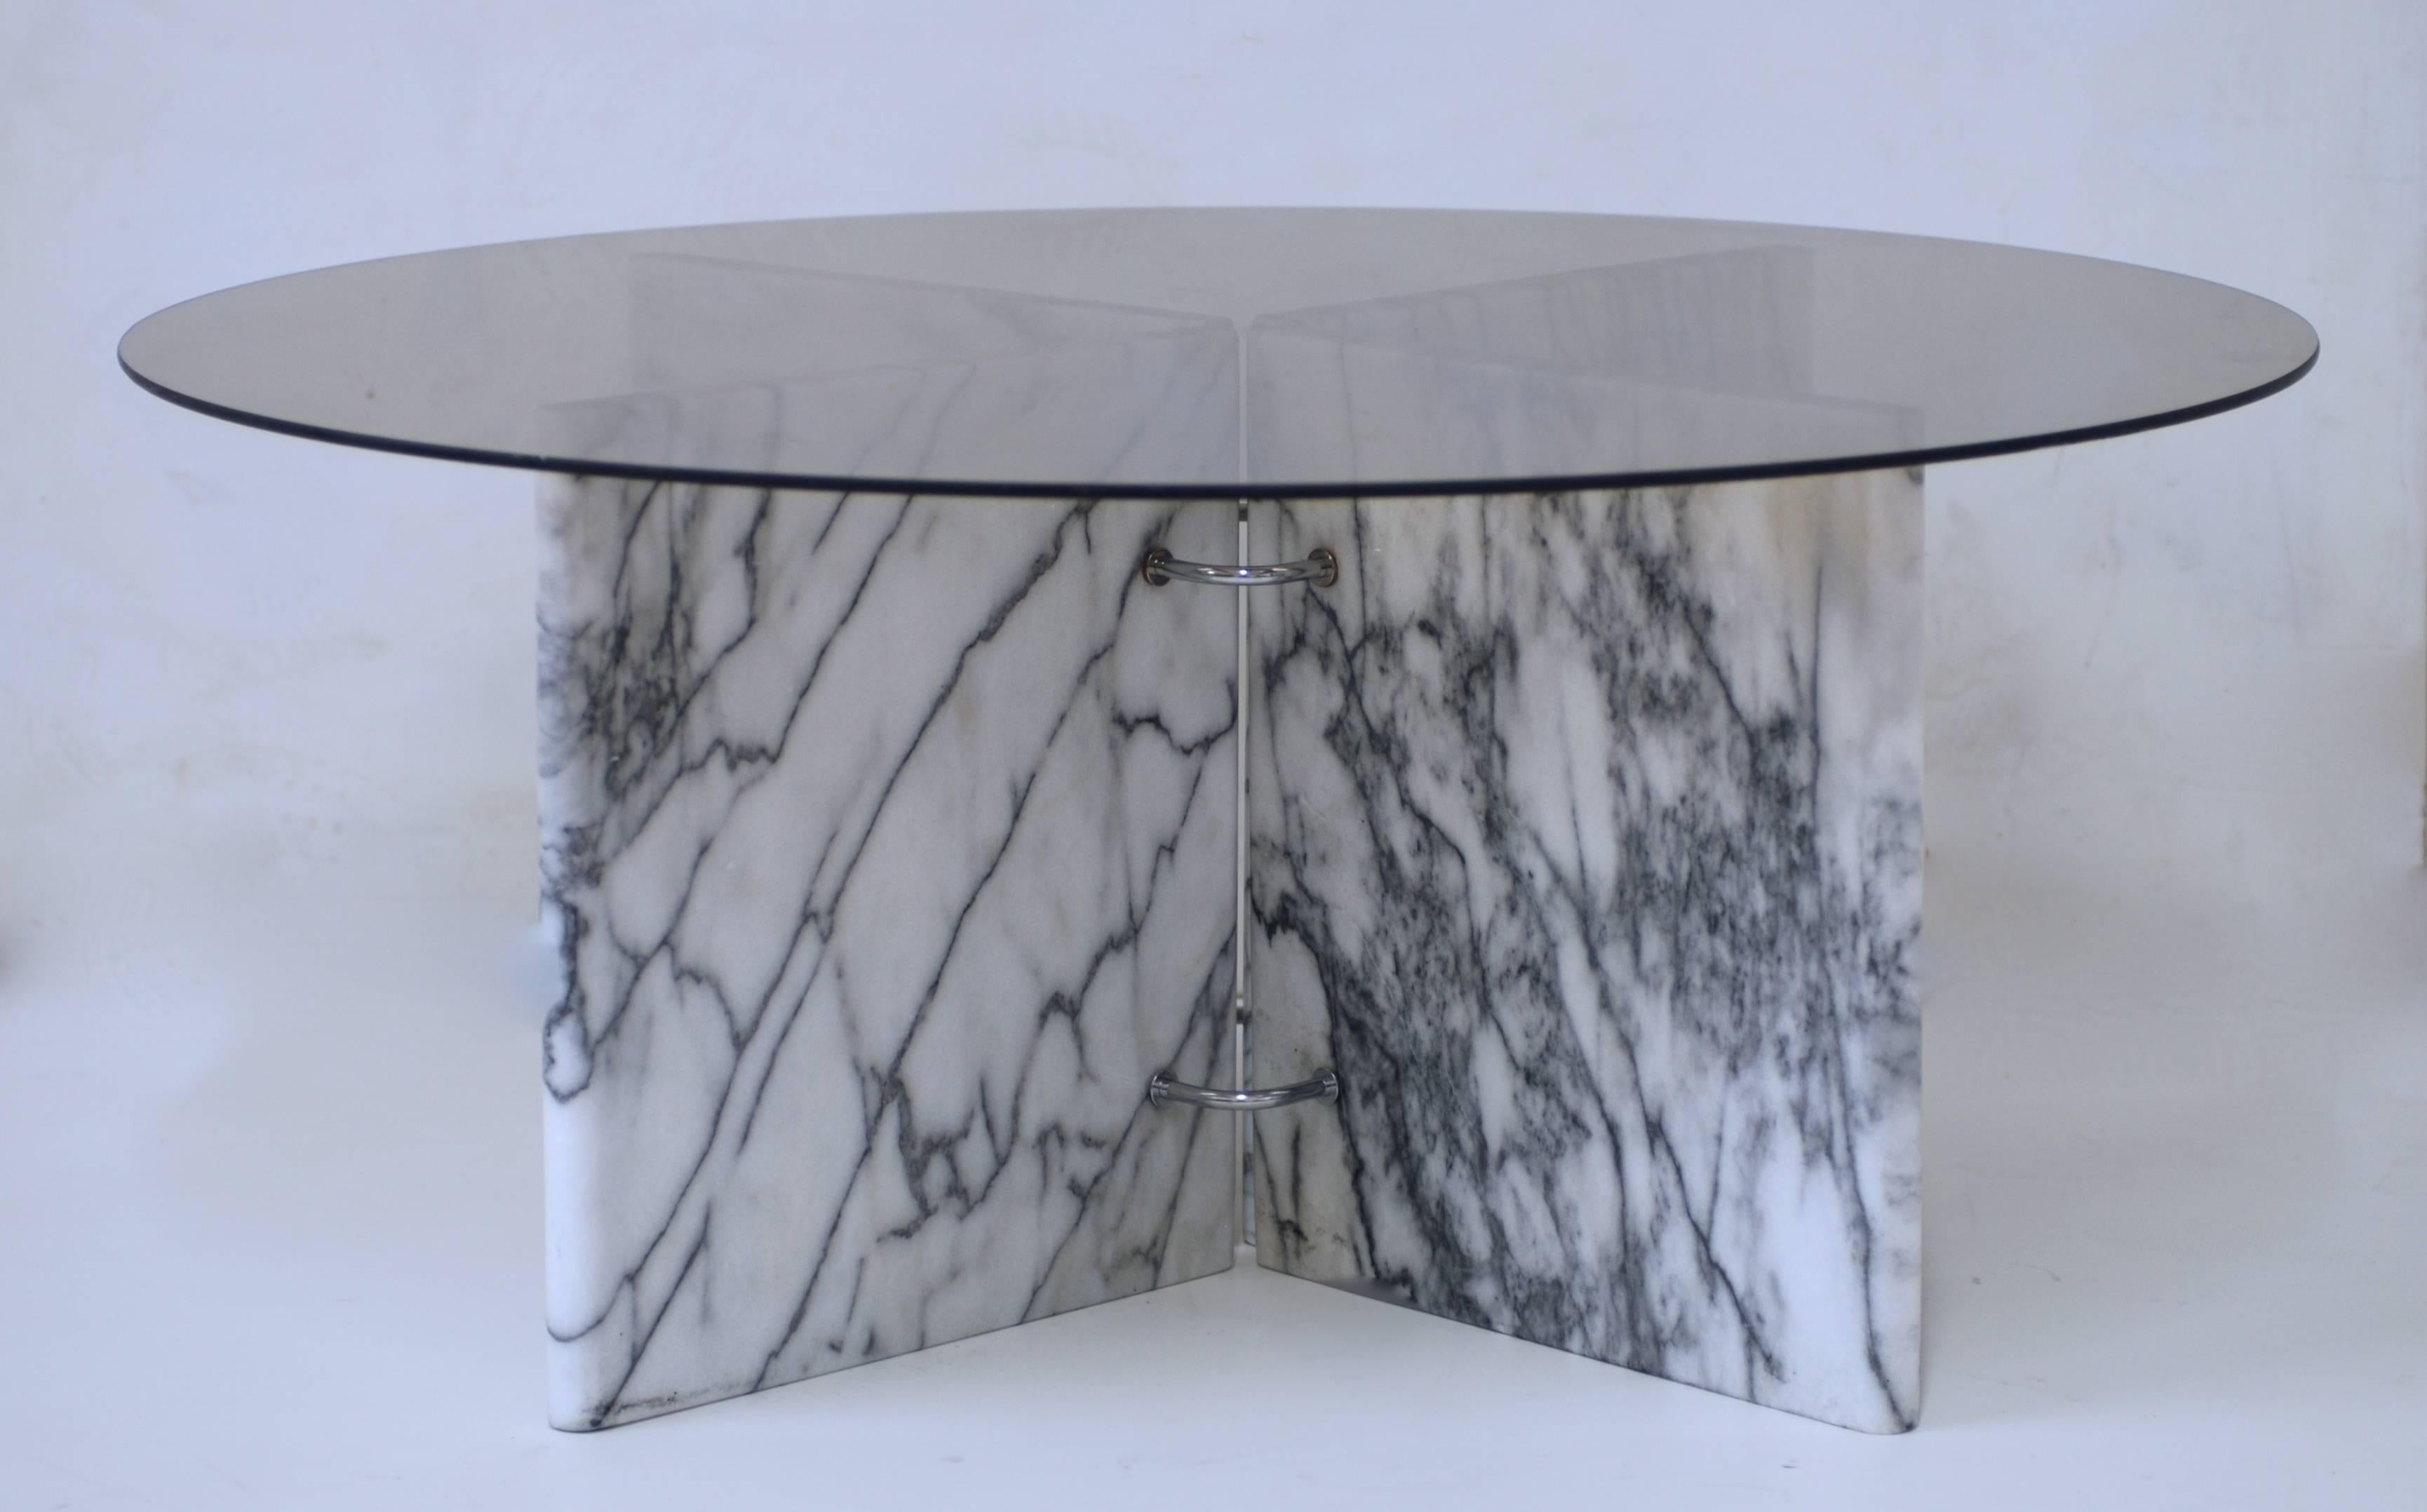 This pair of marble bases can be configured to hold various sizes of glass tops as shown in the photos. They can accommodate a round, square or rectangular piece of glass. The marble has chrome fittings which can be unscrewed so they can be shipped